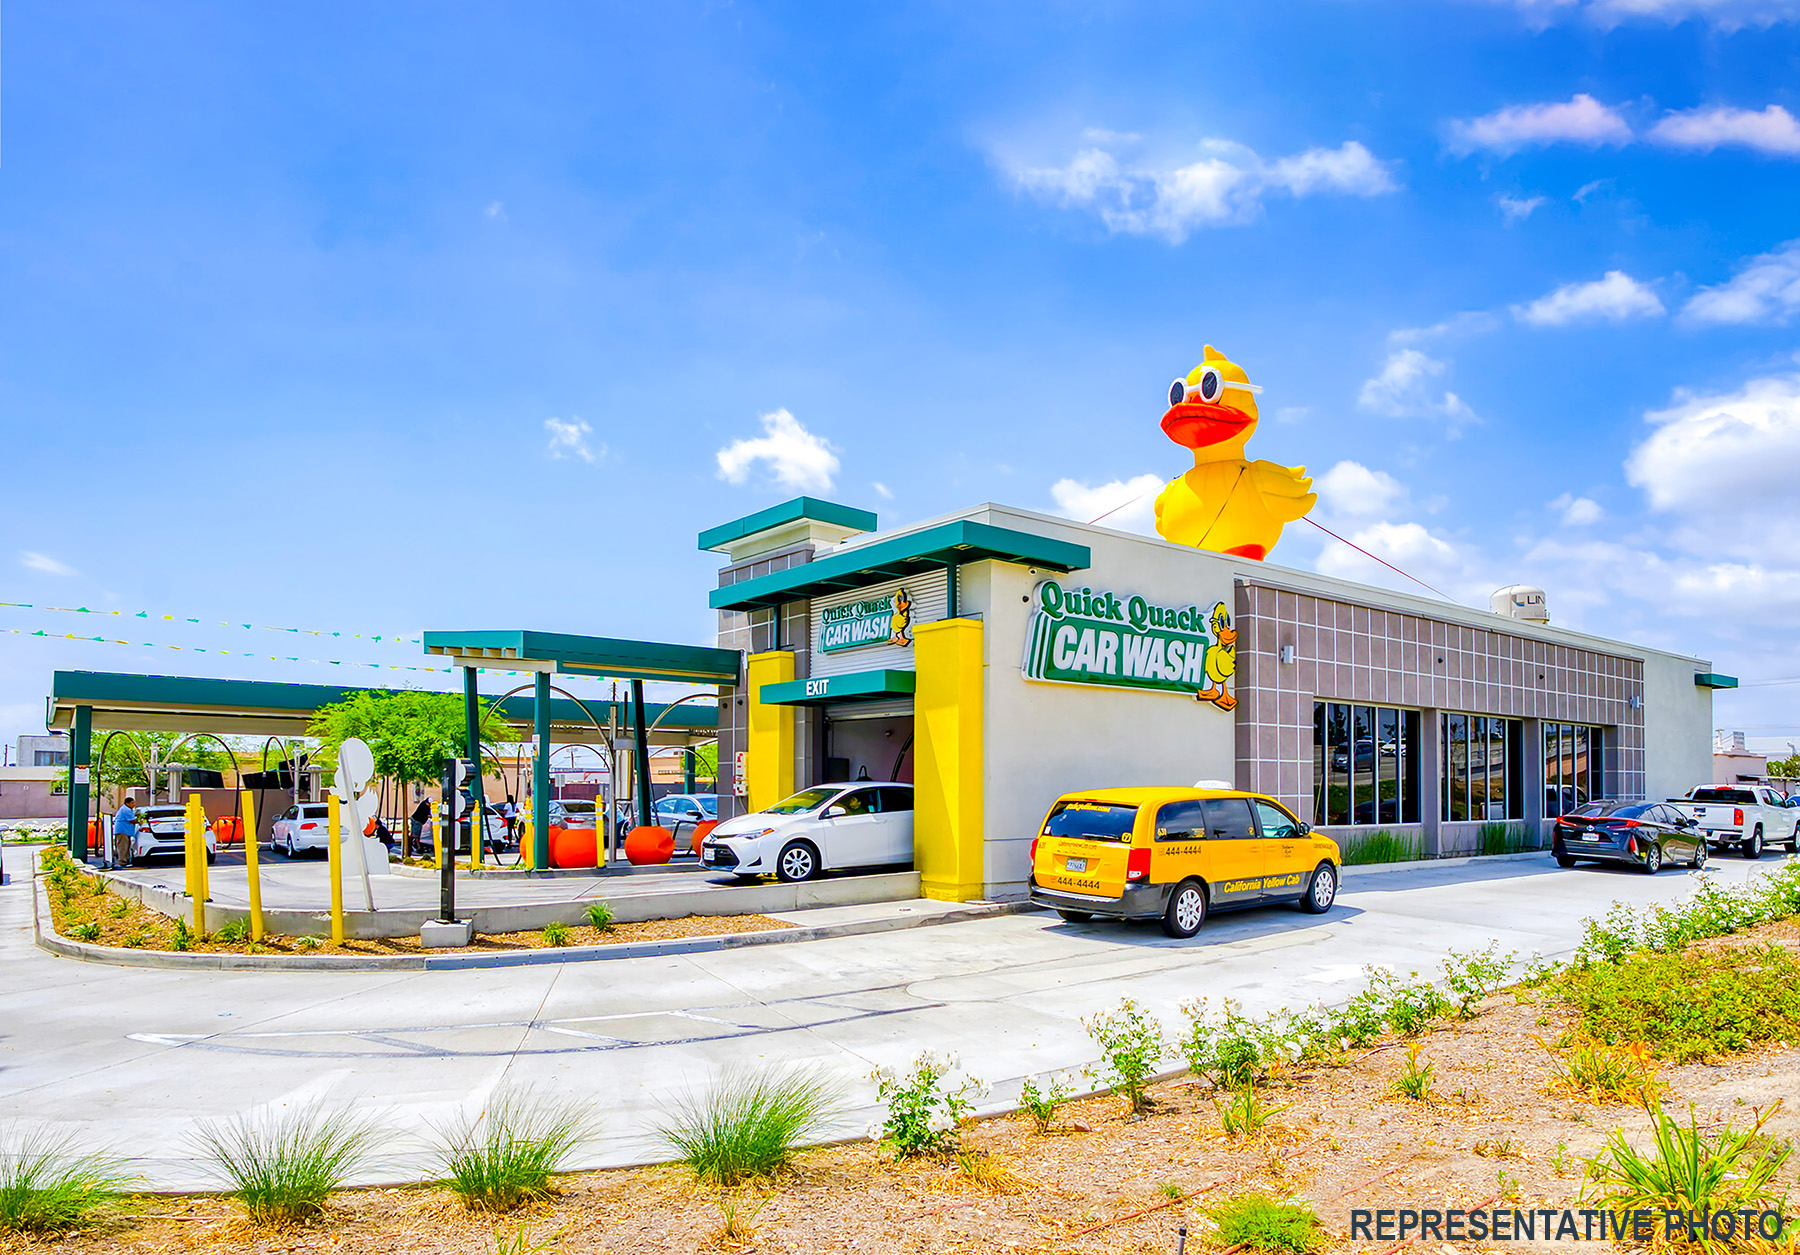 Hanley Investment Group Arranges Pre-Sale of New Construction Single-Tenant  Quick Quack Car Wash in Moreno Valley, Calif., for $3.2 Million 